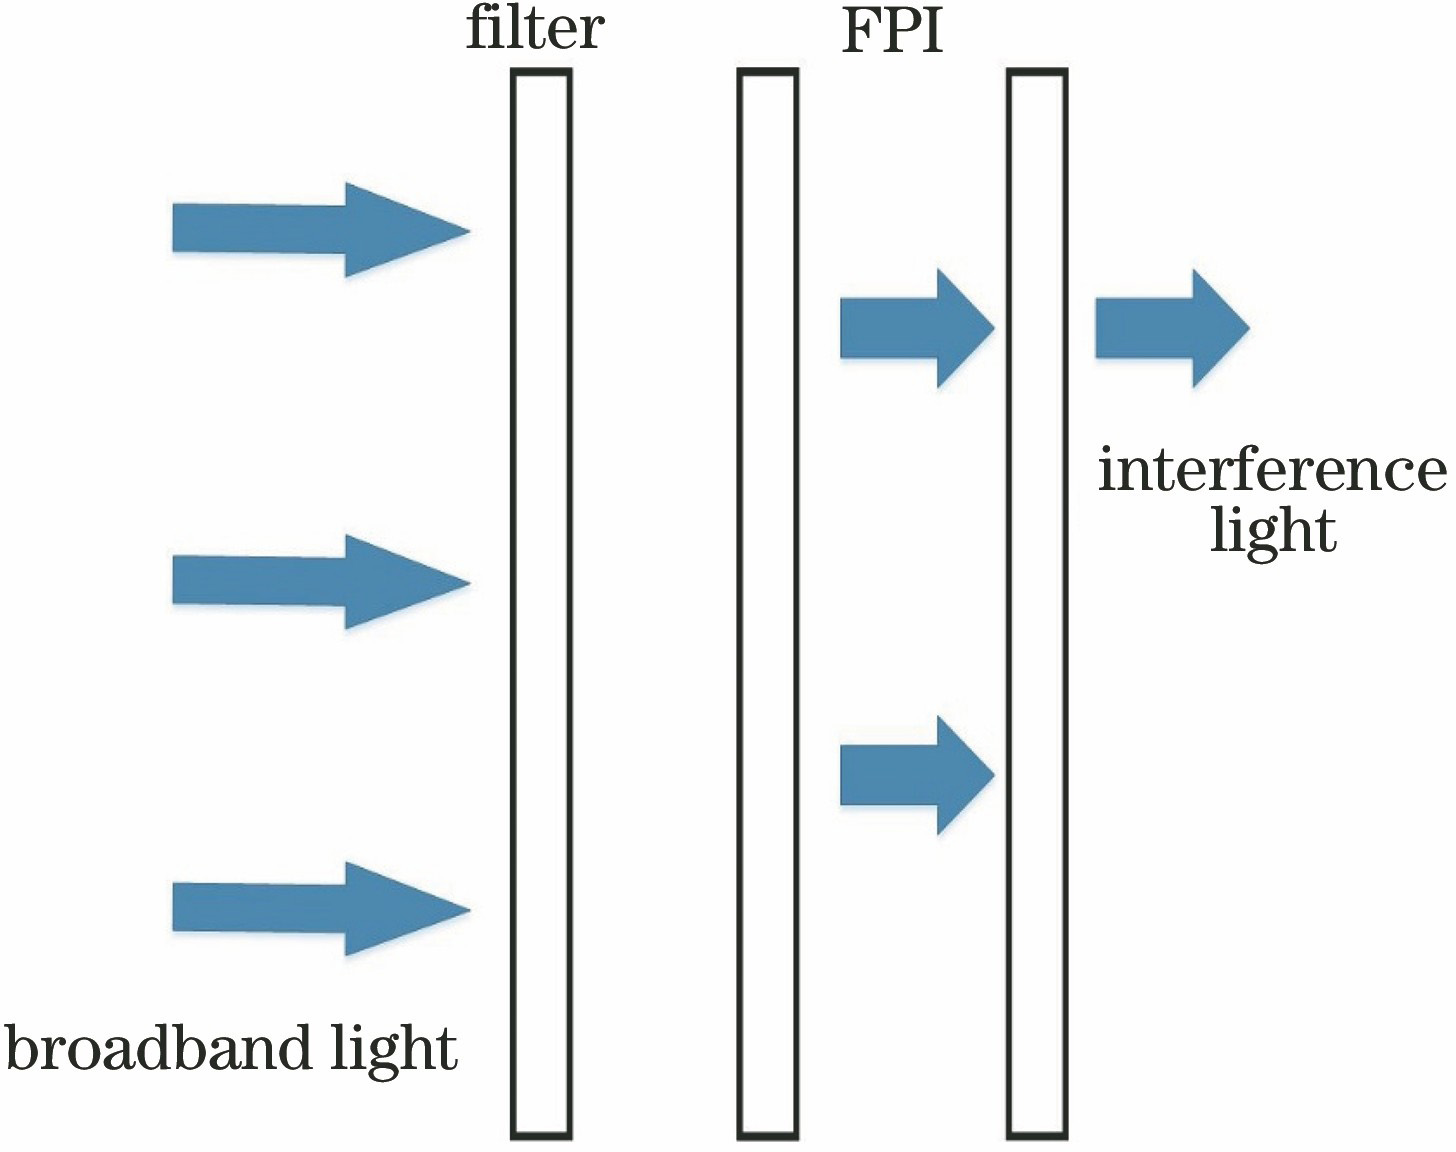 Schematic diagram of filtering light by FPI